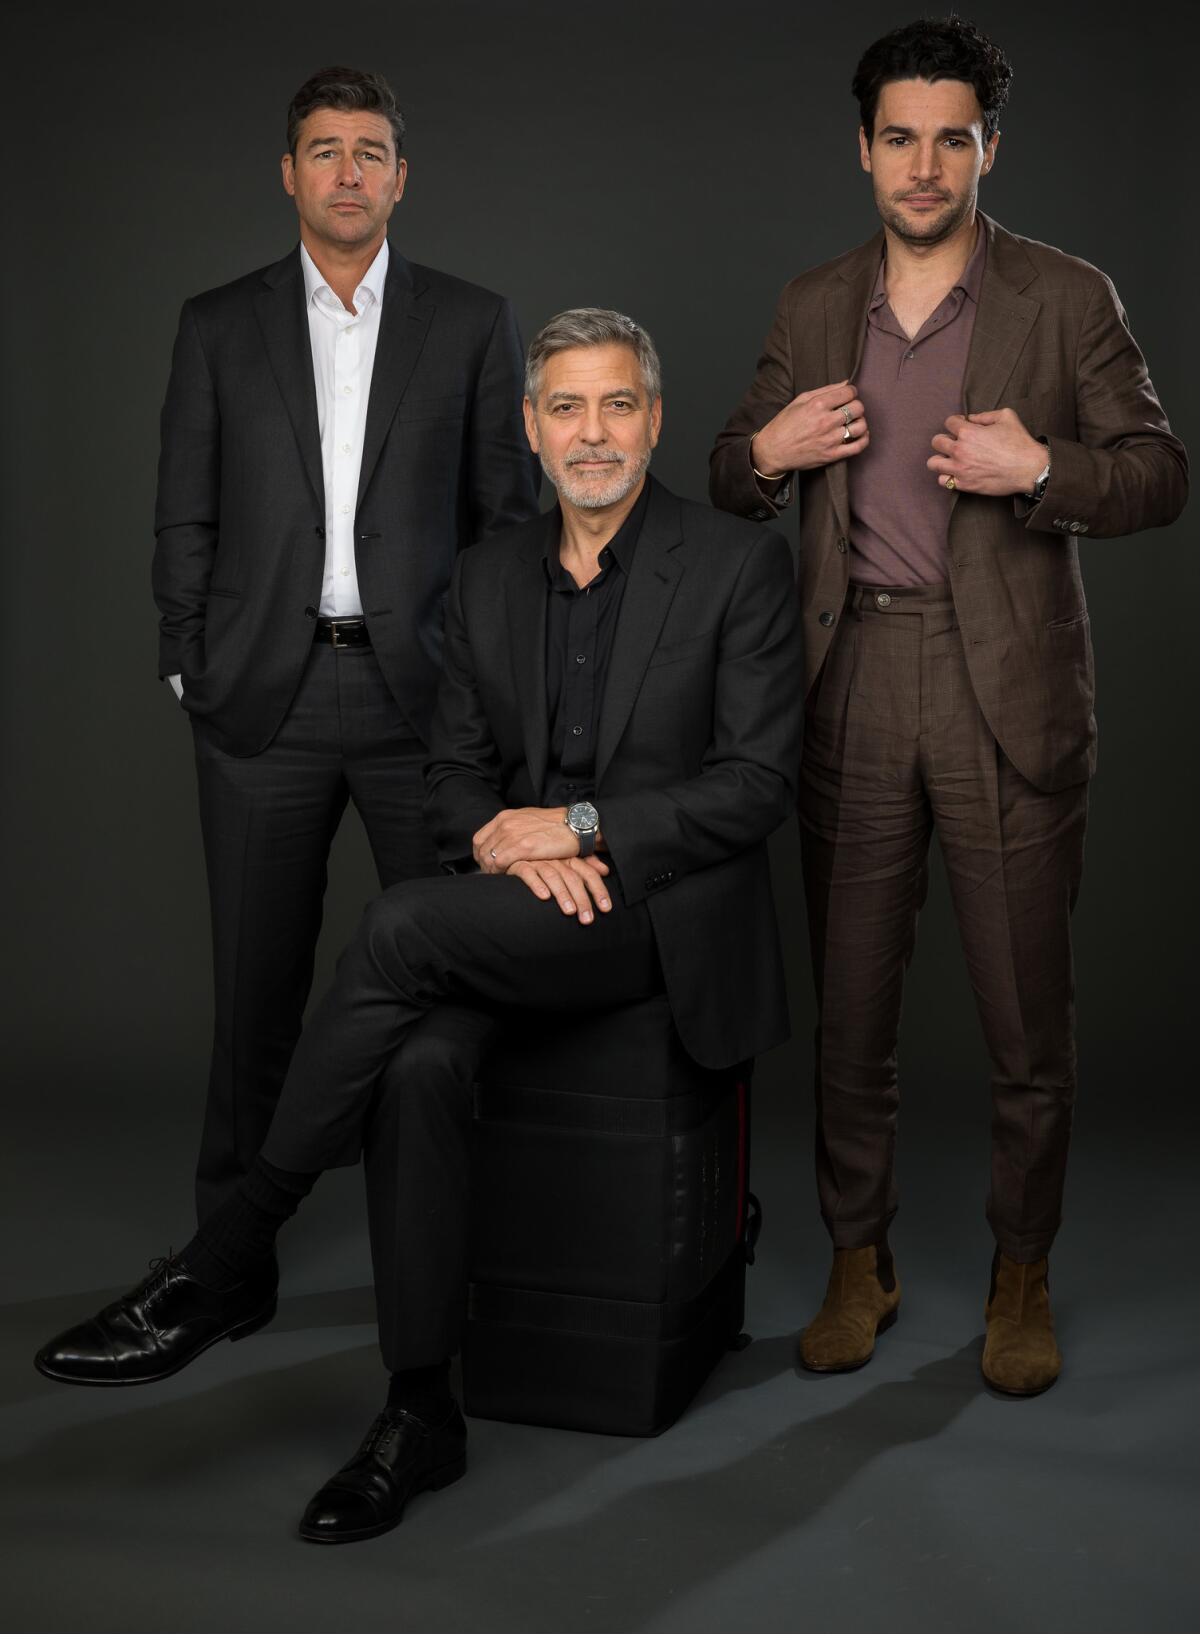 Starring together in Hulu's "Catch 22," from left, Kyle Chandler, George Clooney and Chris Abbott. Clooney directs the adaptation of Joseph Heller's satirical novel.